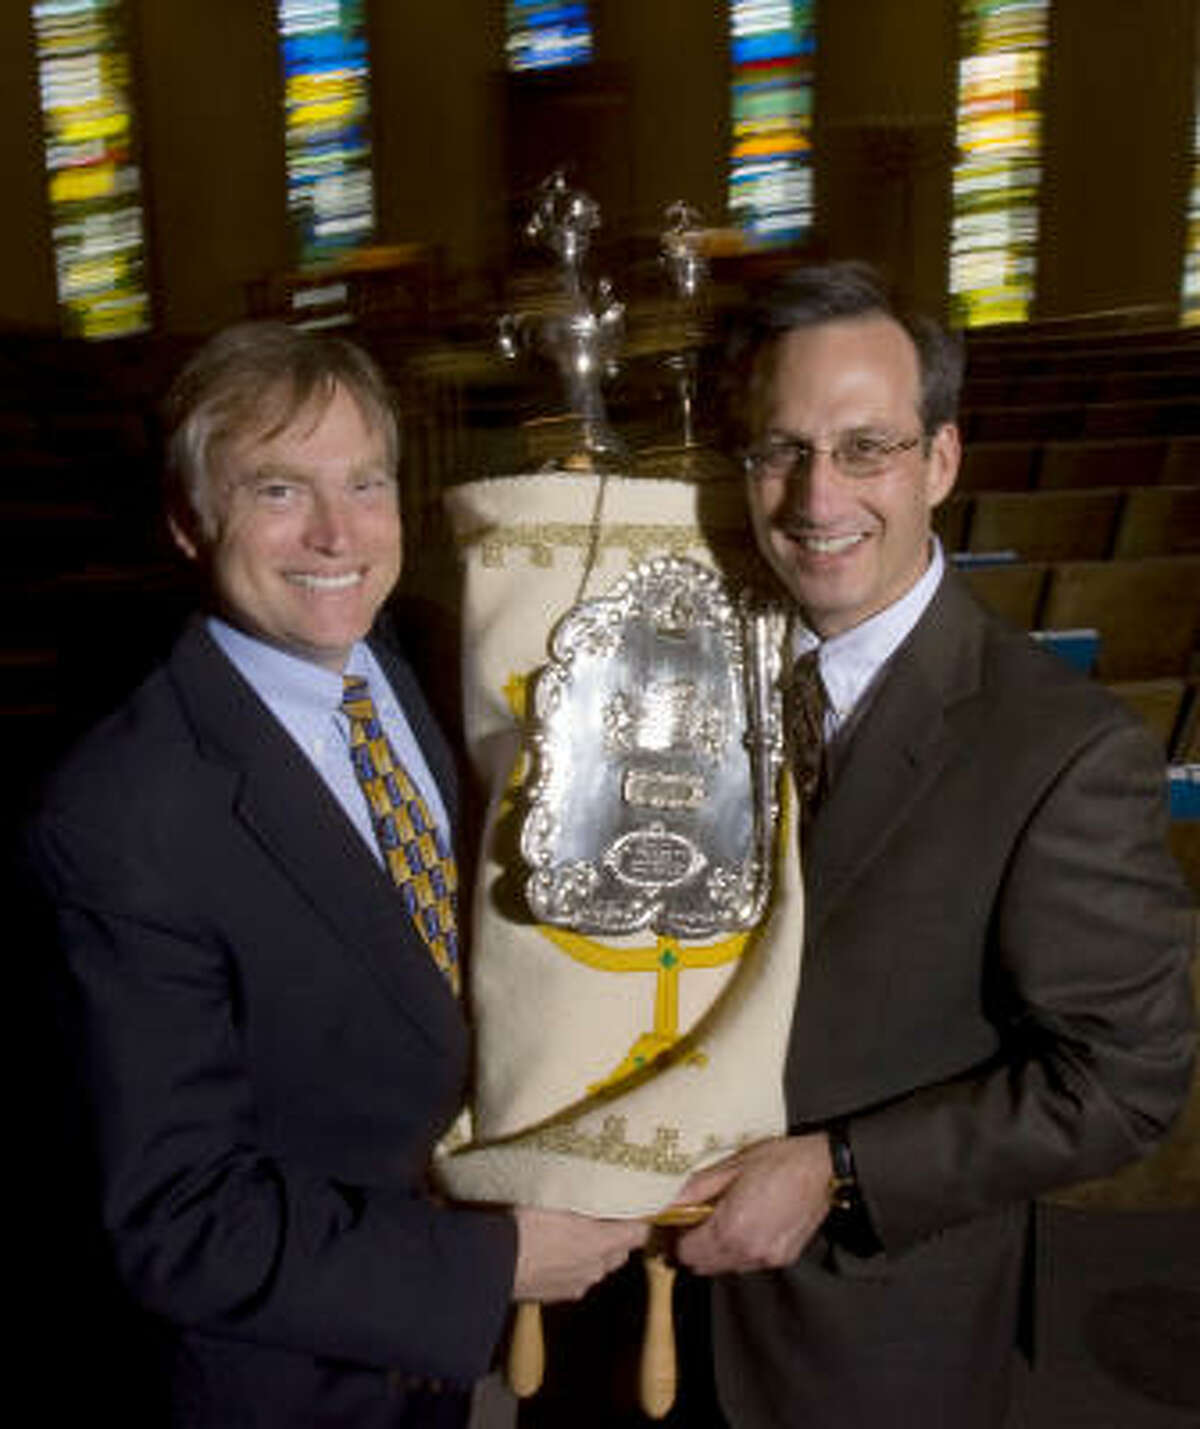 Steven Gross, left, senior rabbi of Houston Congregation for Reform Judaism, and David Lyon, senior rabbi of Congregation Beth Israel, hold a Beth Israel Torah that a member of both congregations paid to have restored and donated to HCRJ.